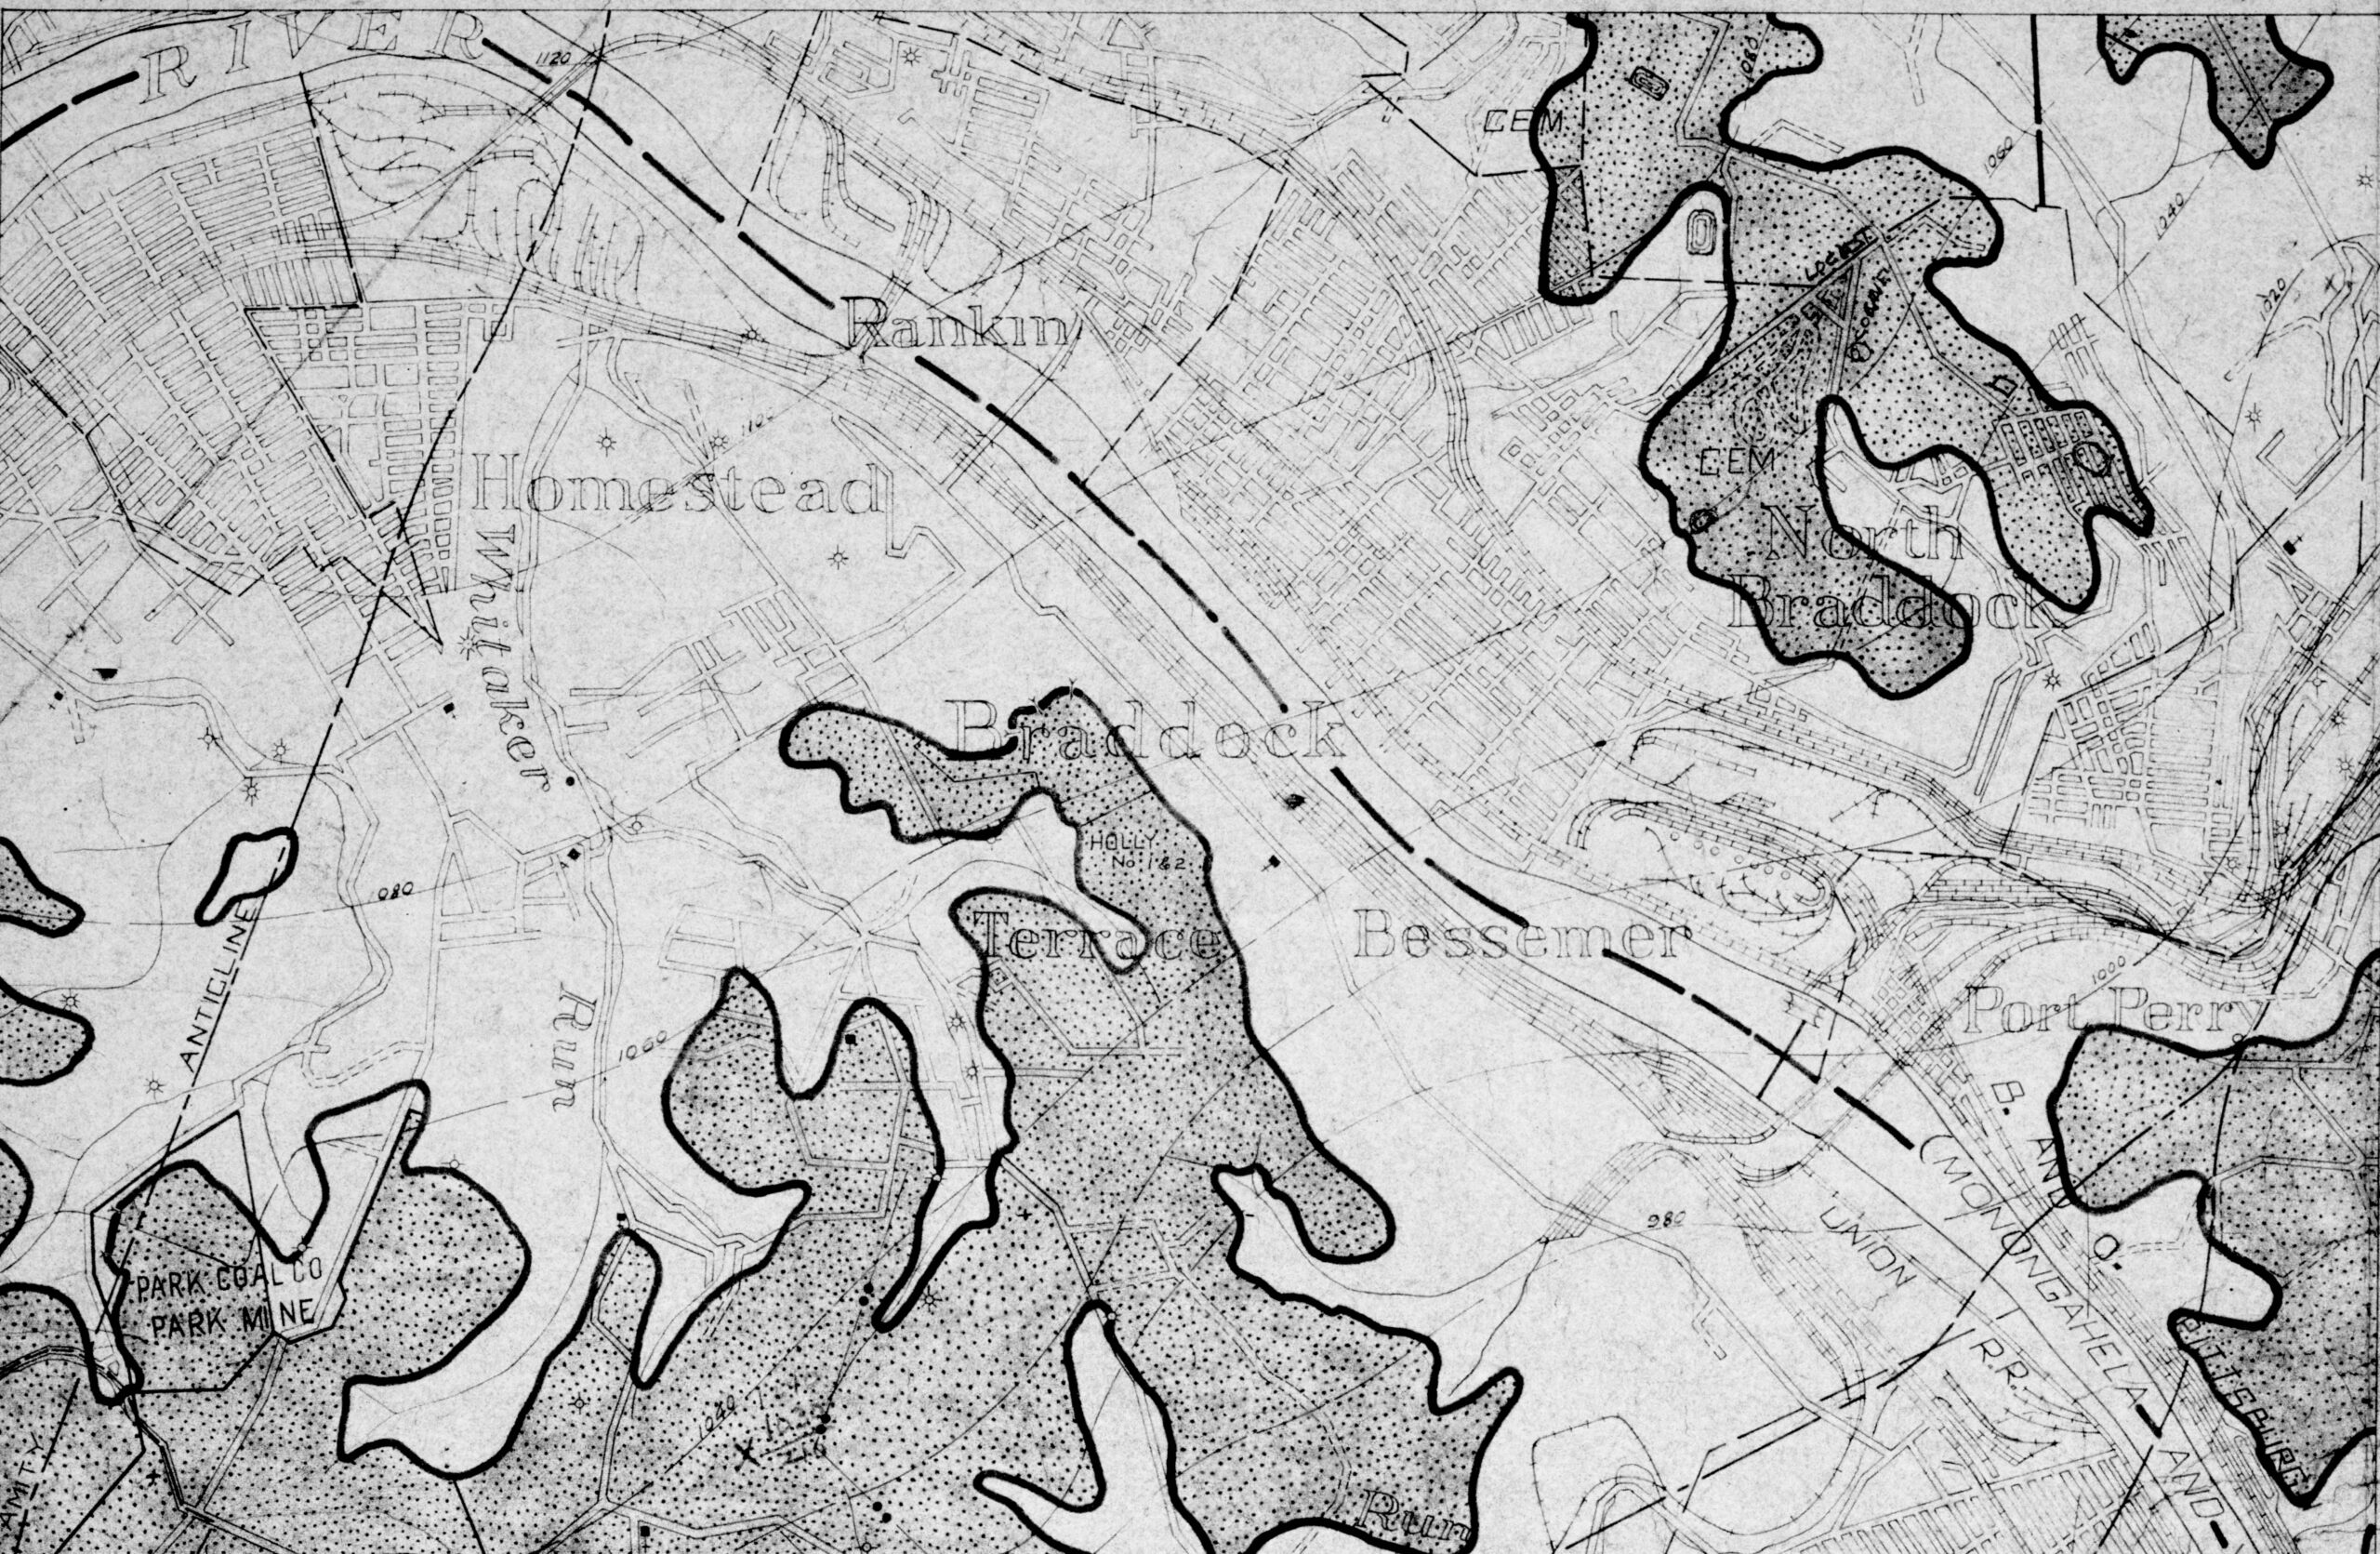 Black and white topographic map of Braddock, PA